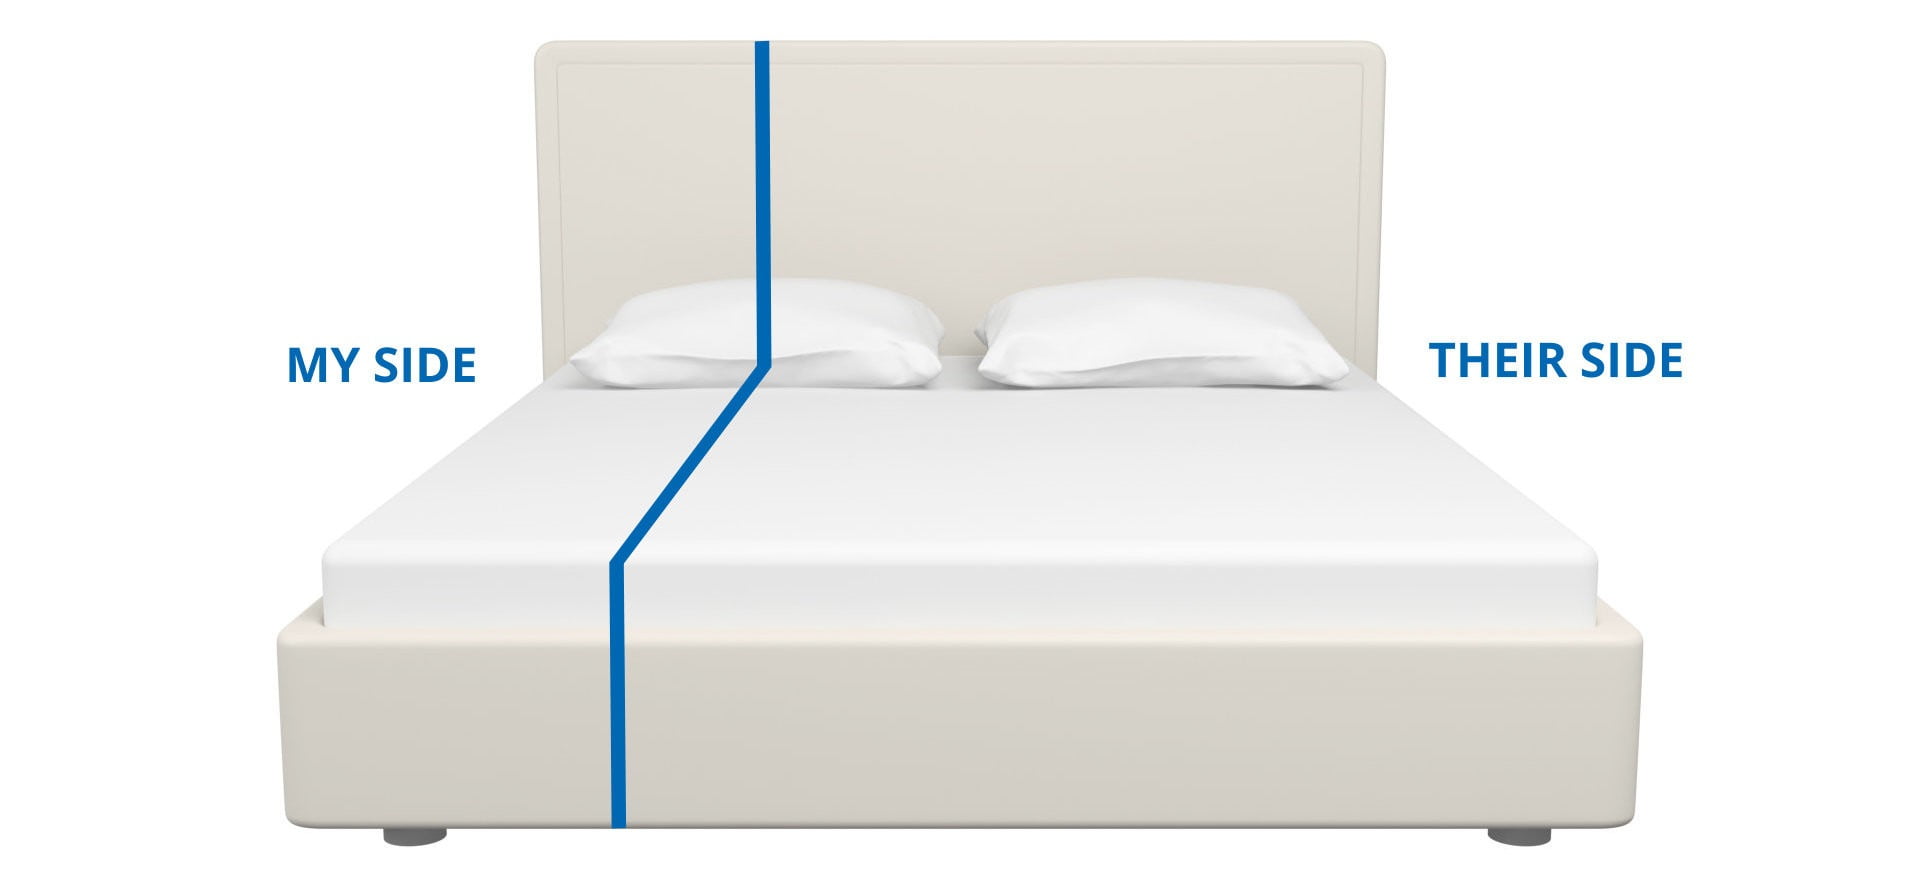 Bed Sizes Uk And Mattress Size, What Is Bigger Than A Super King Size Bed